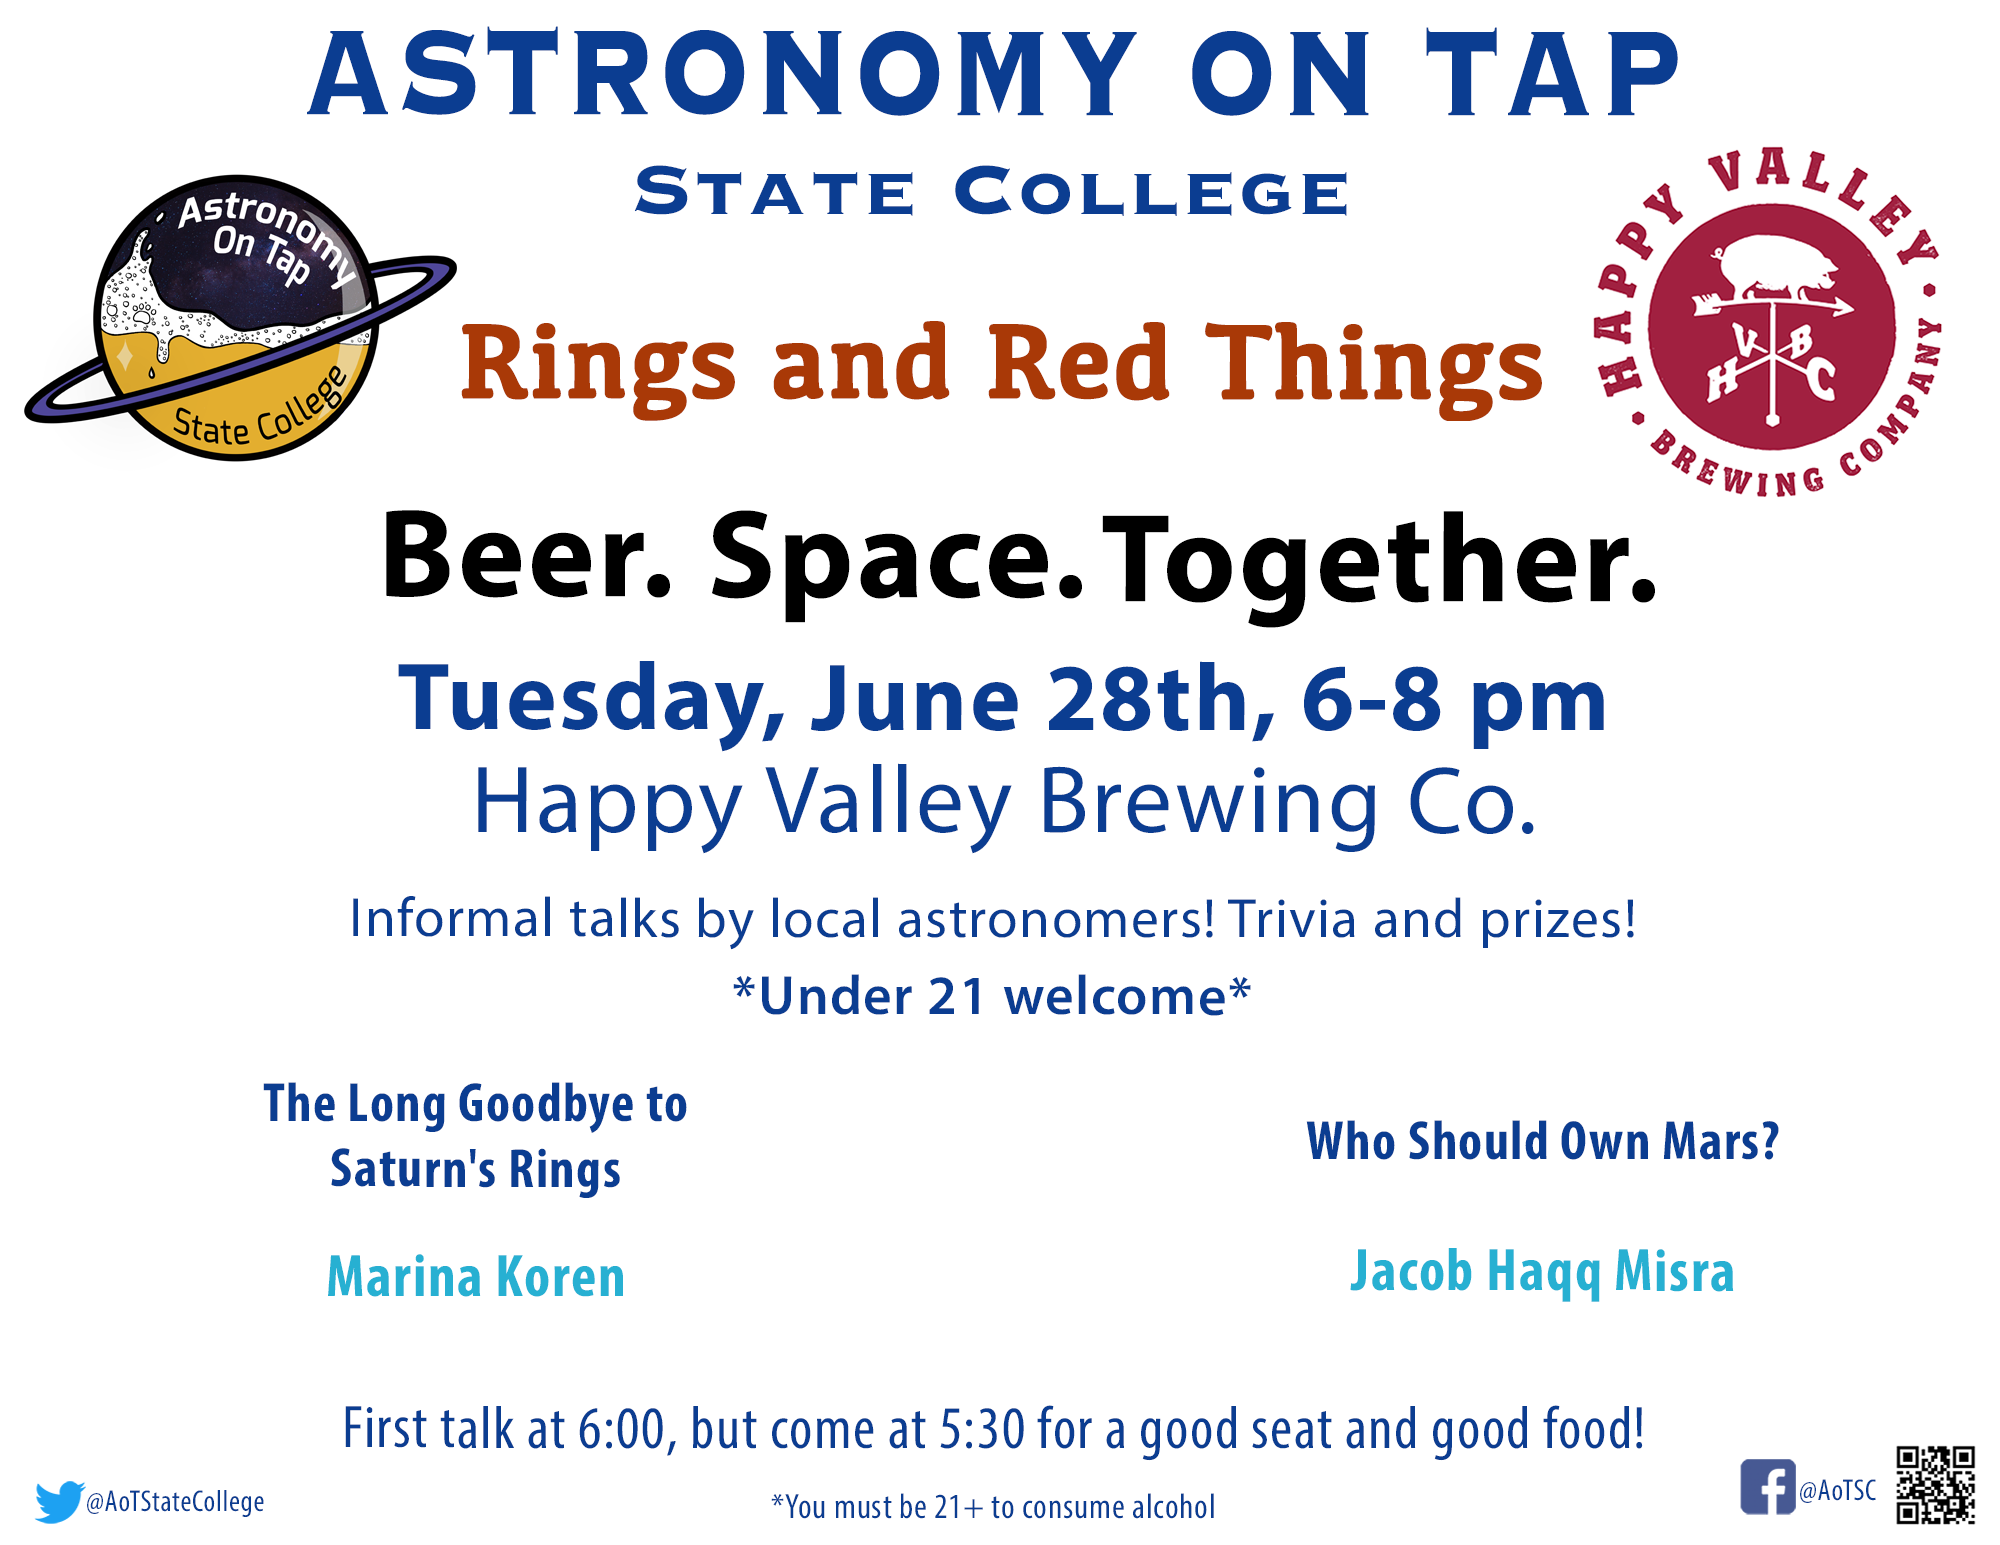 Flyer advertising Astronomy on Tap: State College on June 28 from 6-8 pm at Happy Valley Brewing Company